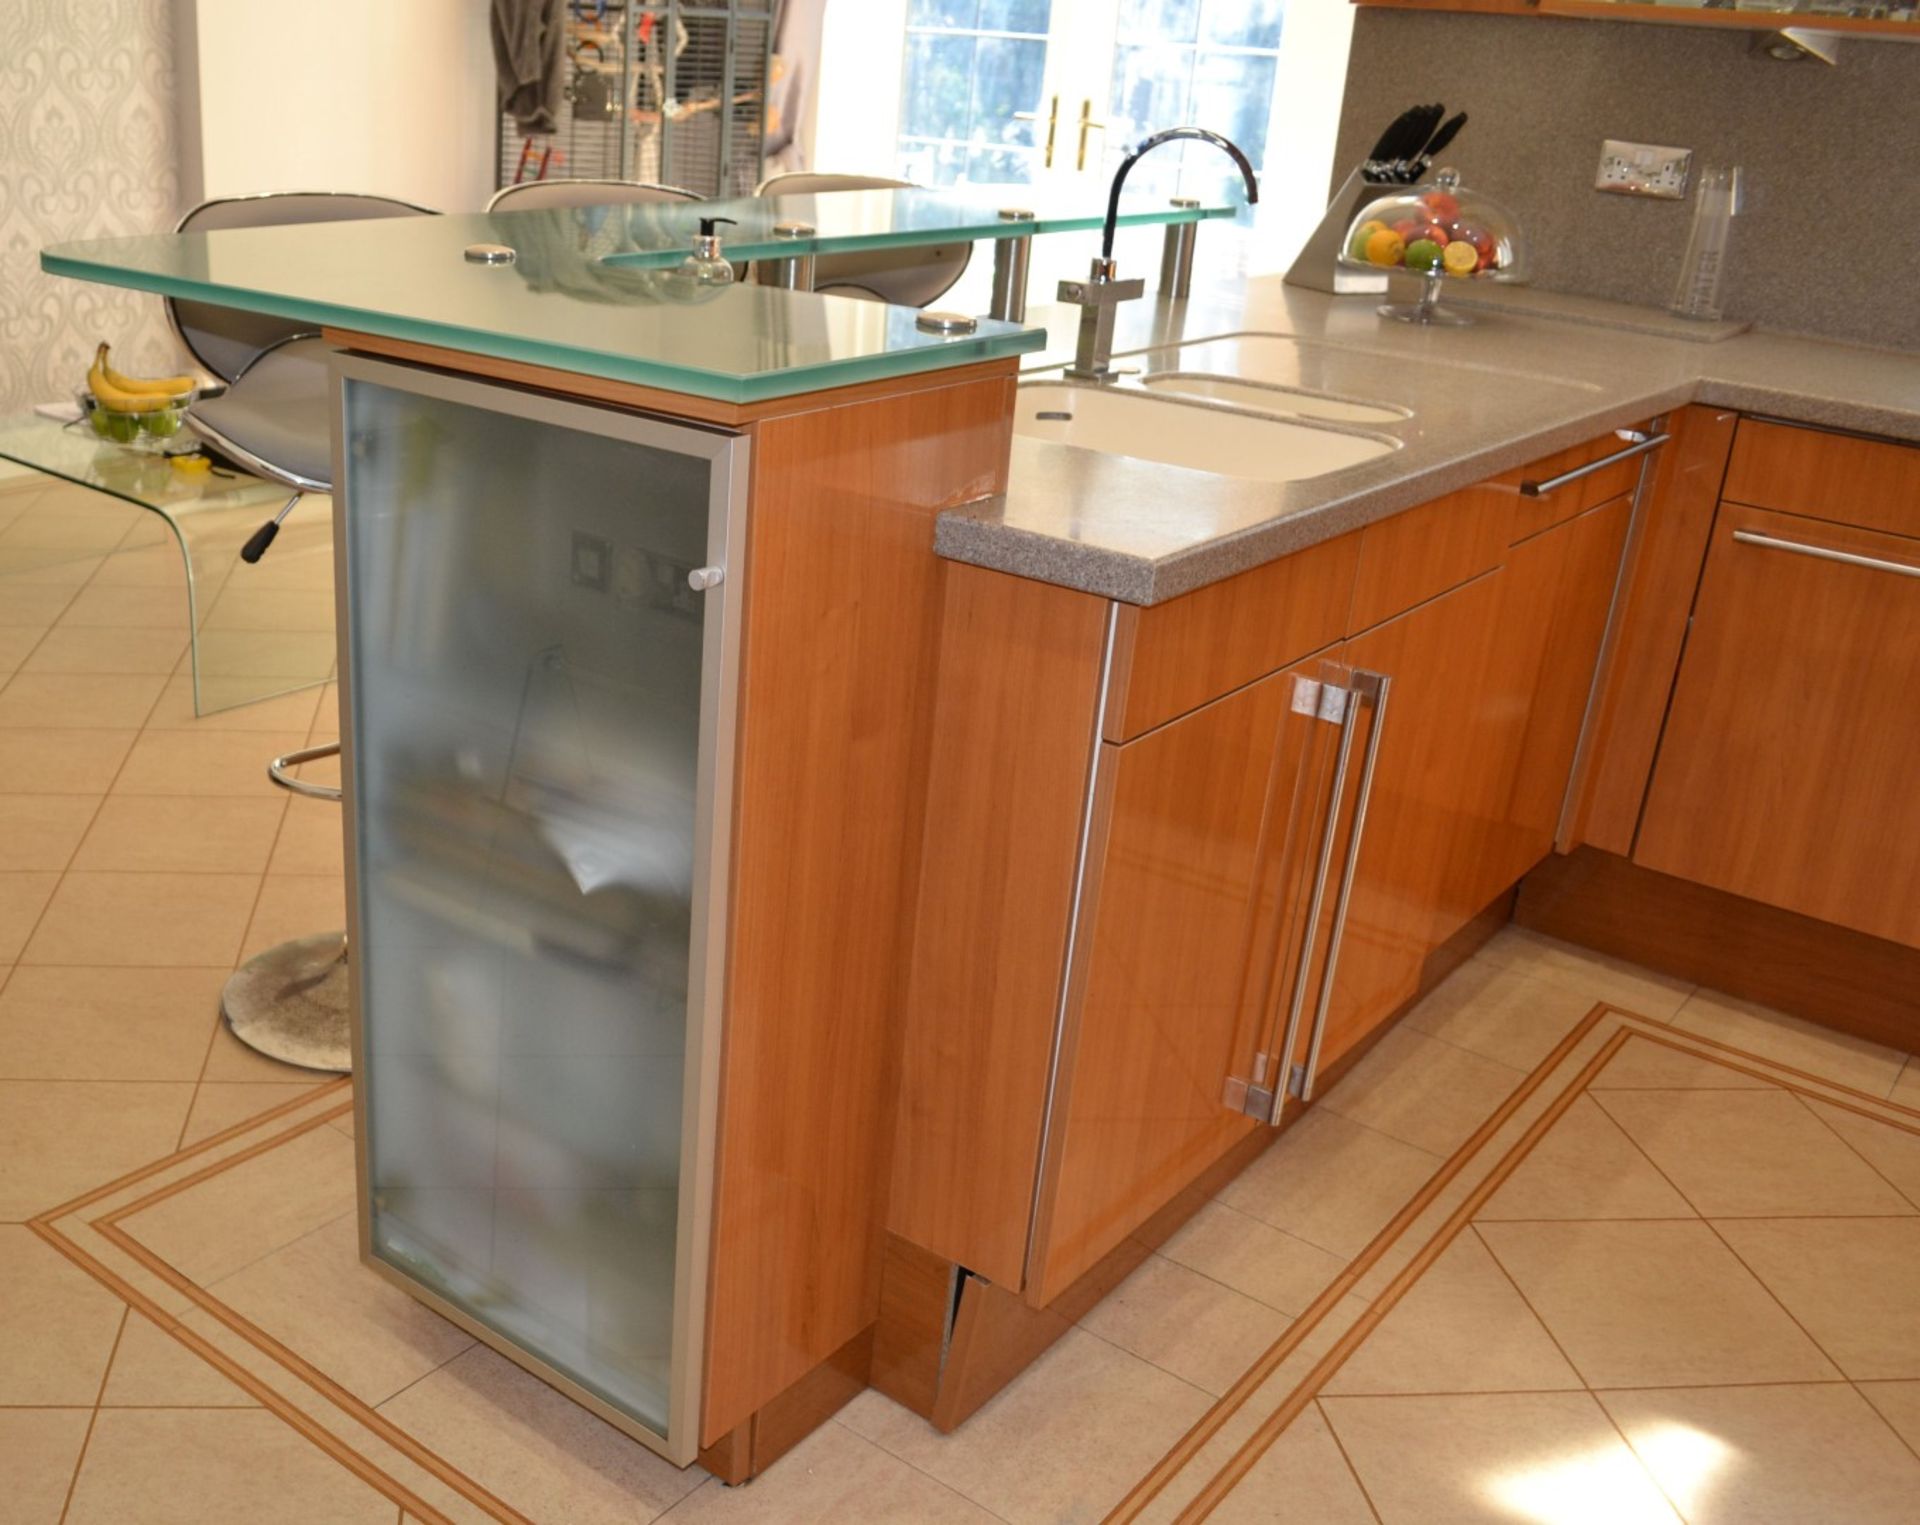 1 x Bespoke Siematic Gloss Fitted Kitchen With Corian Worktops and Frosted Glass Breakfast Bar - - Image 16 of 75